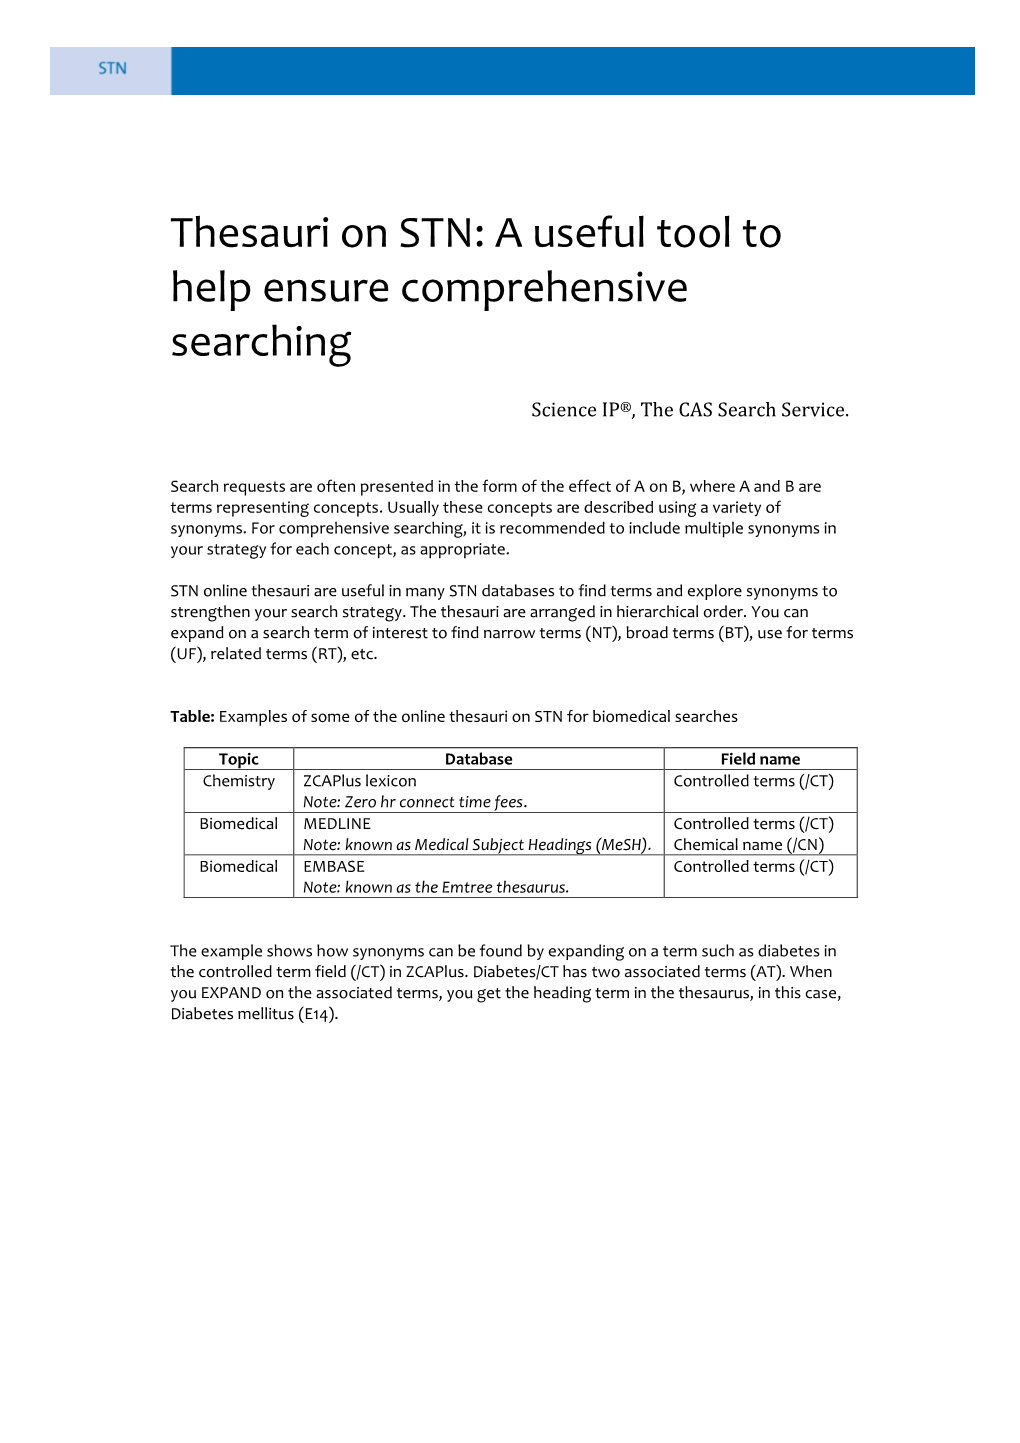 Thesauri on STN: a Useful Tool to Help Ensure Comprehensive Searching